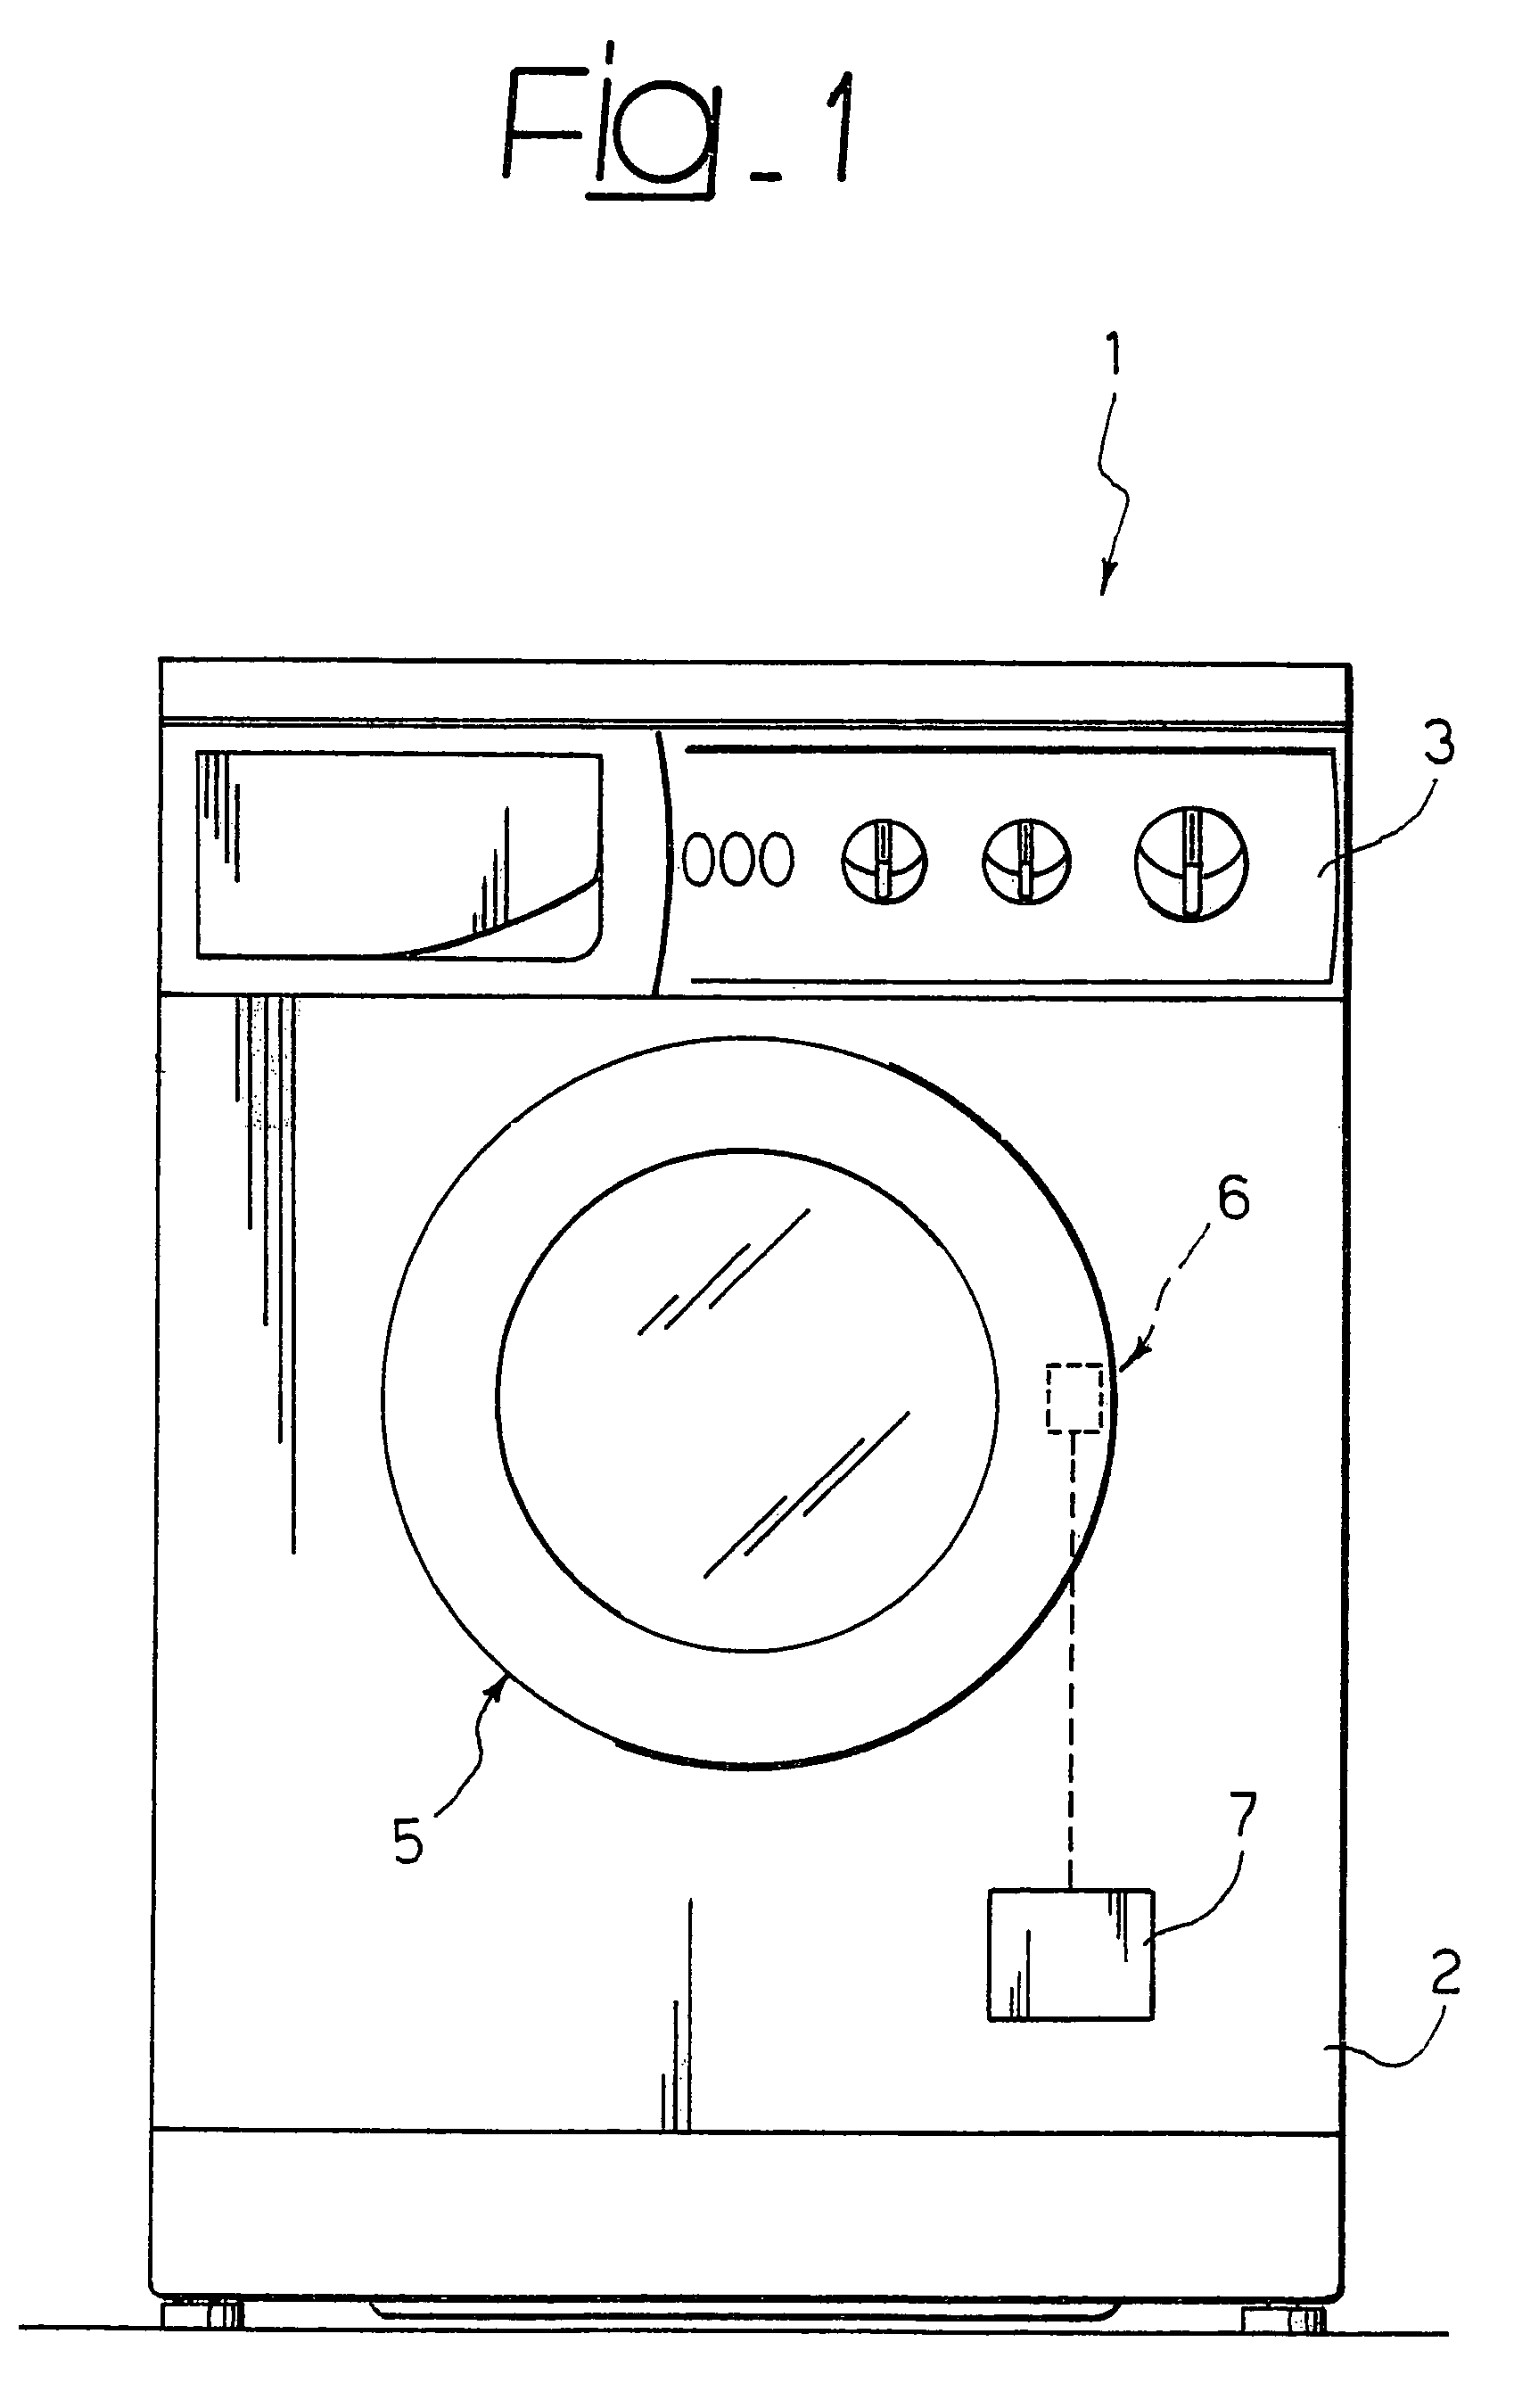 Household appliance, namely a machine for washing and/or drying laundry, with a door block/release device that can be actuated electrically